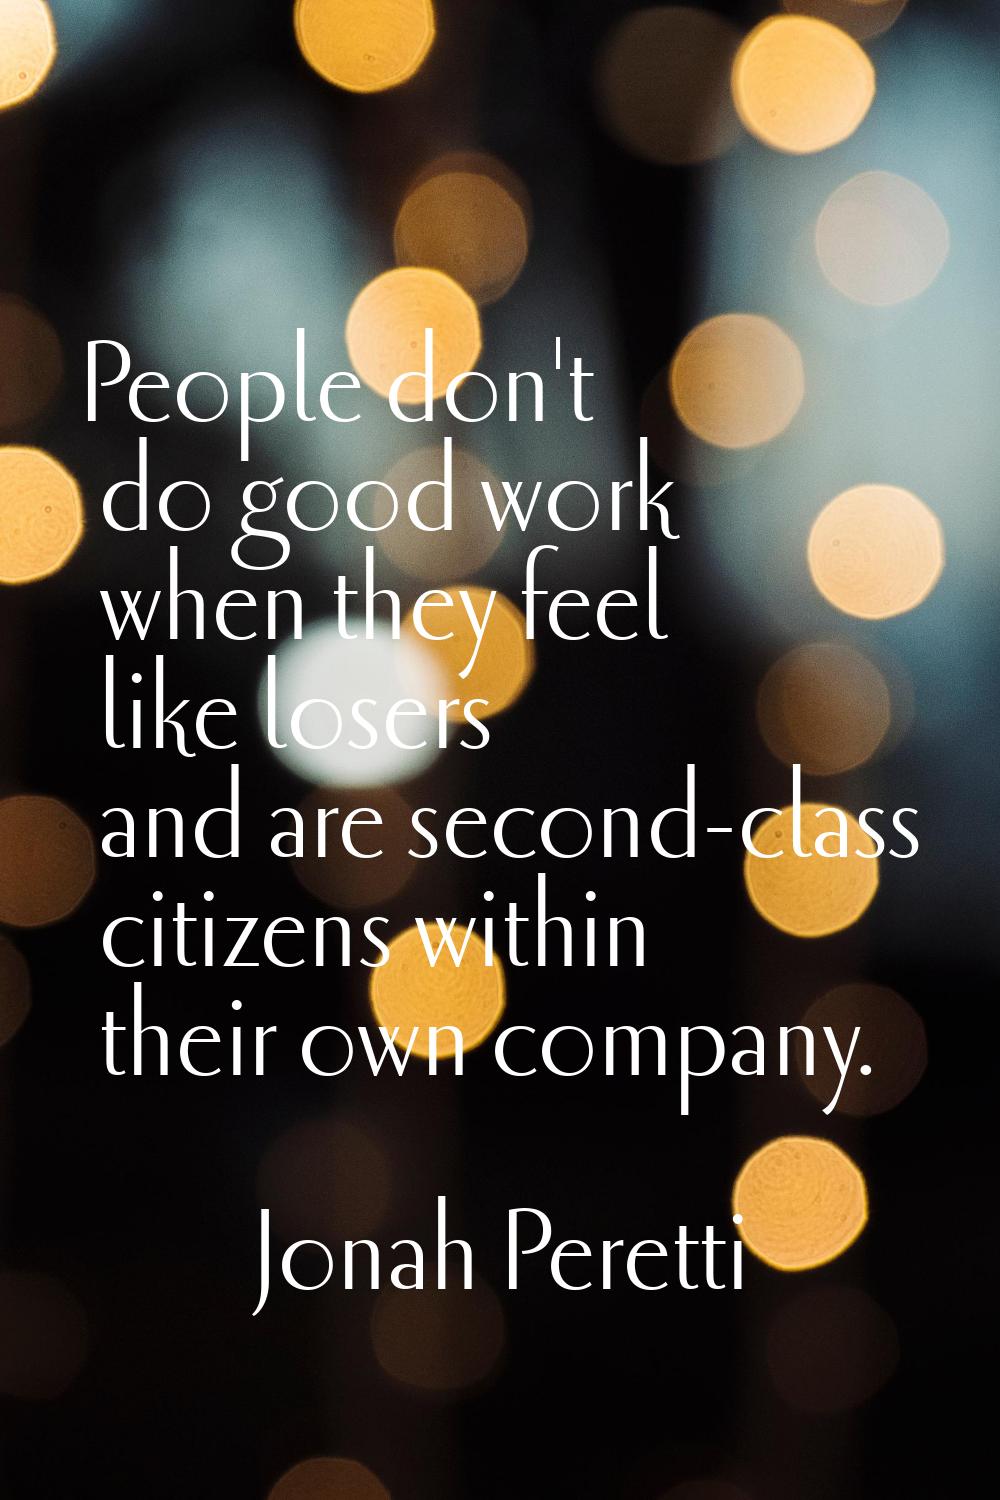 People don't do good work when they feel like losers and are second-class citizens within their own